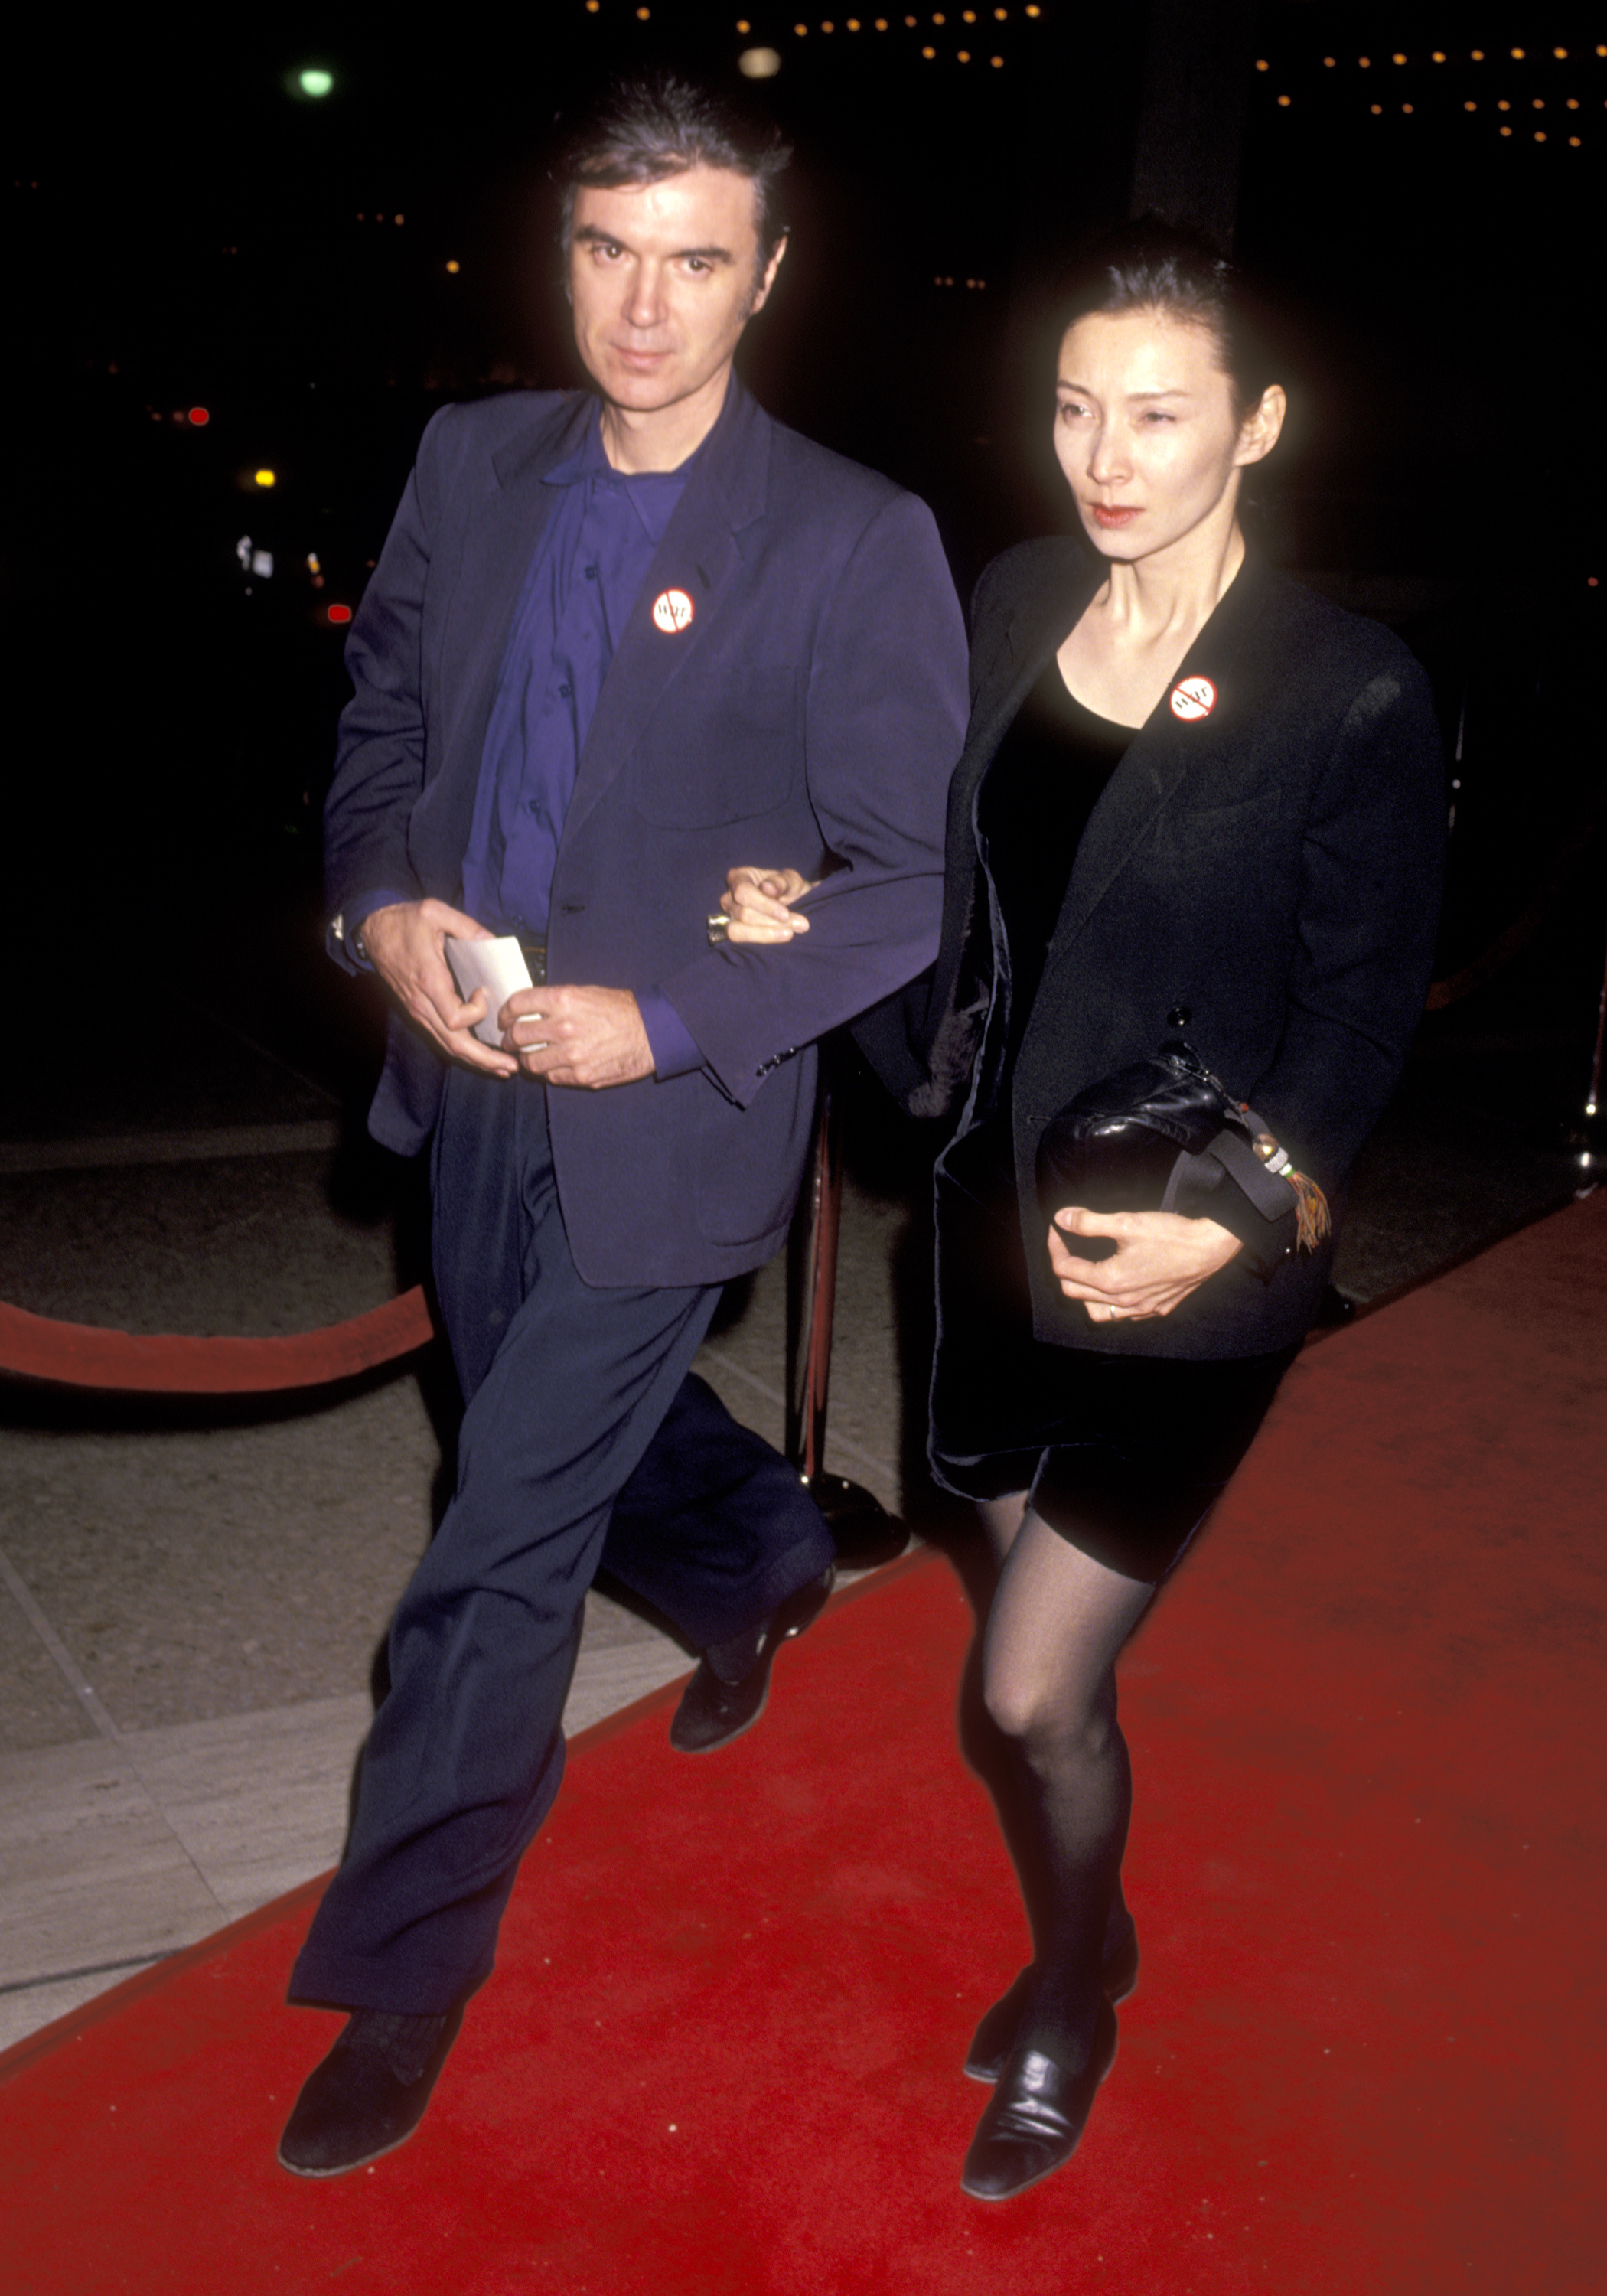 David Byrne and Adelle Lutz during "The Silence of the Lambs" Century City premiere on February 1, 1991, at Cineplex Odeon Century Plaza Cinemas in Century City, California. | Source: Getty Images